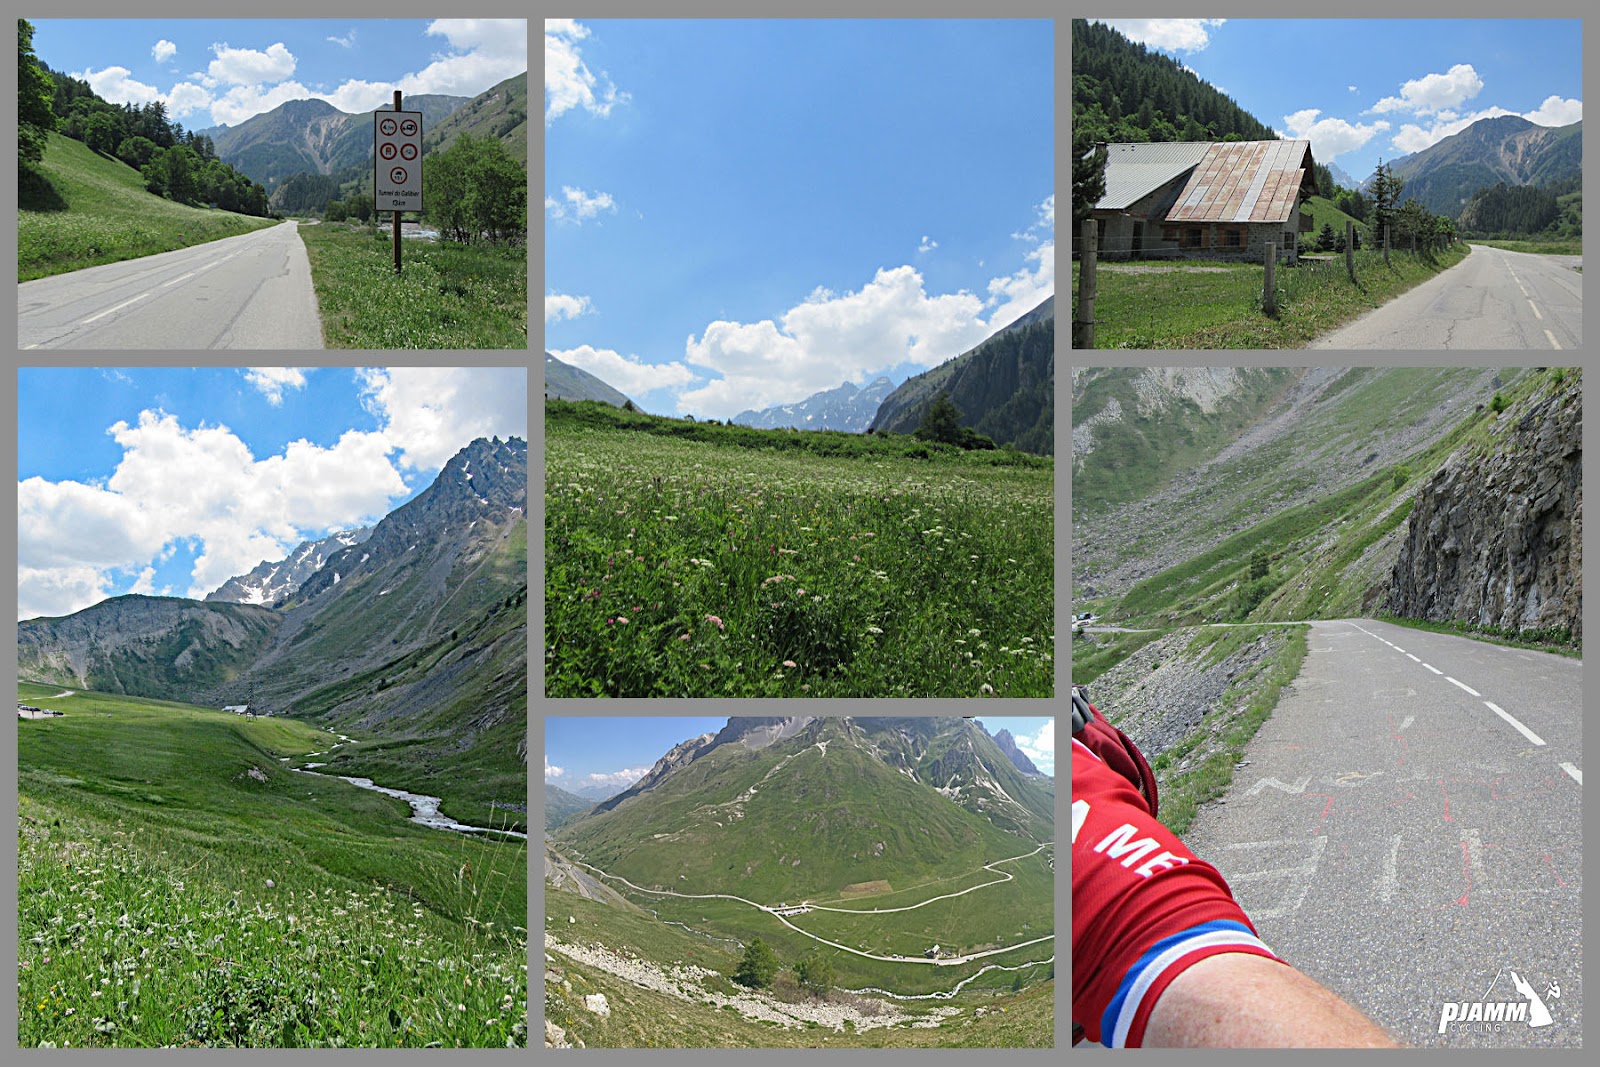 Cycling Col du Galibier from Valloire: photo collage; scenic and pastoral French Alps landscape, blue sky, white clouds, green grass with yellow wildflowers